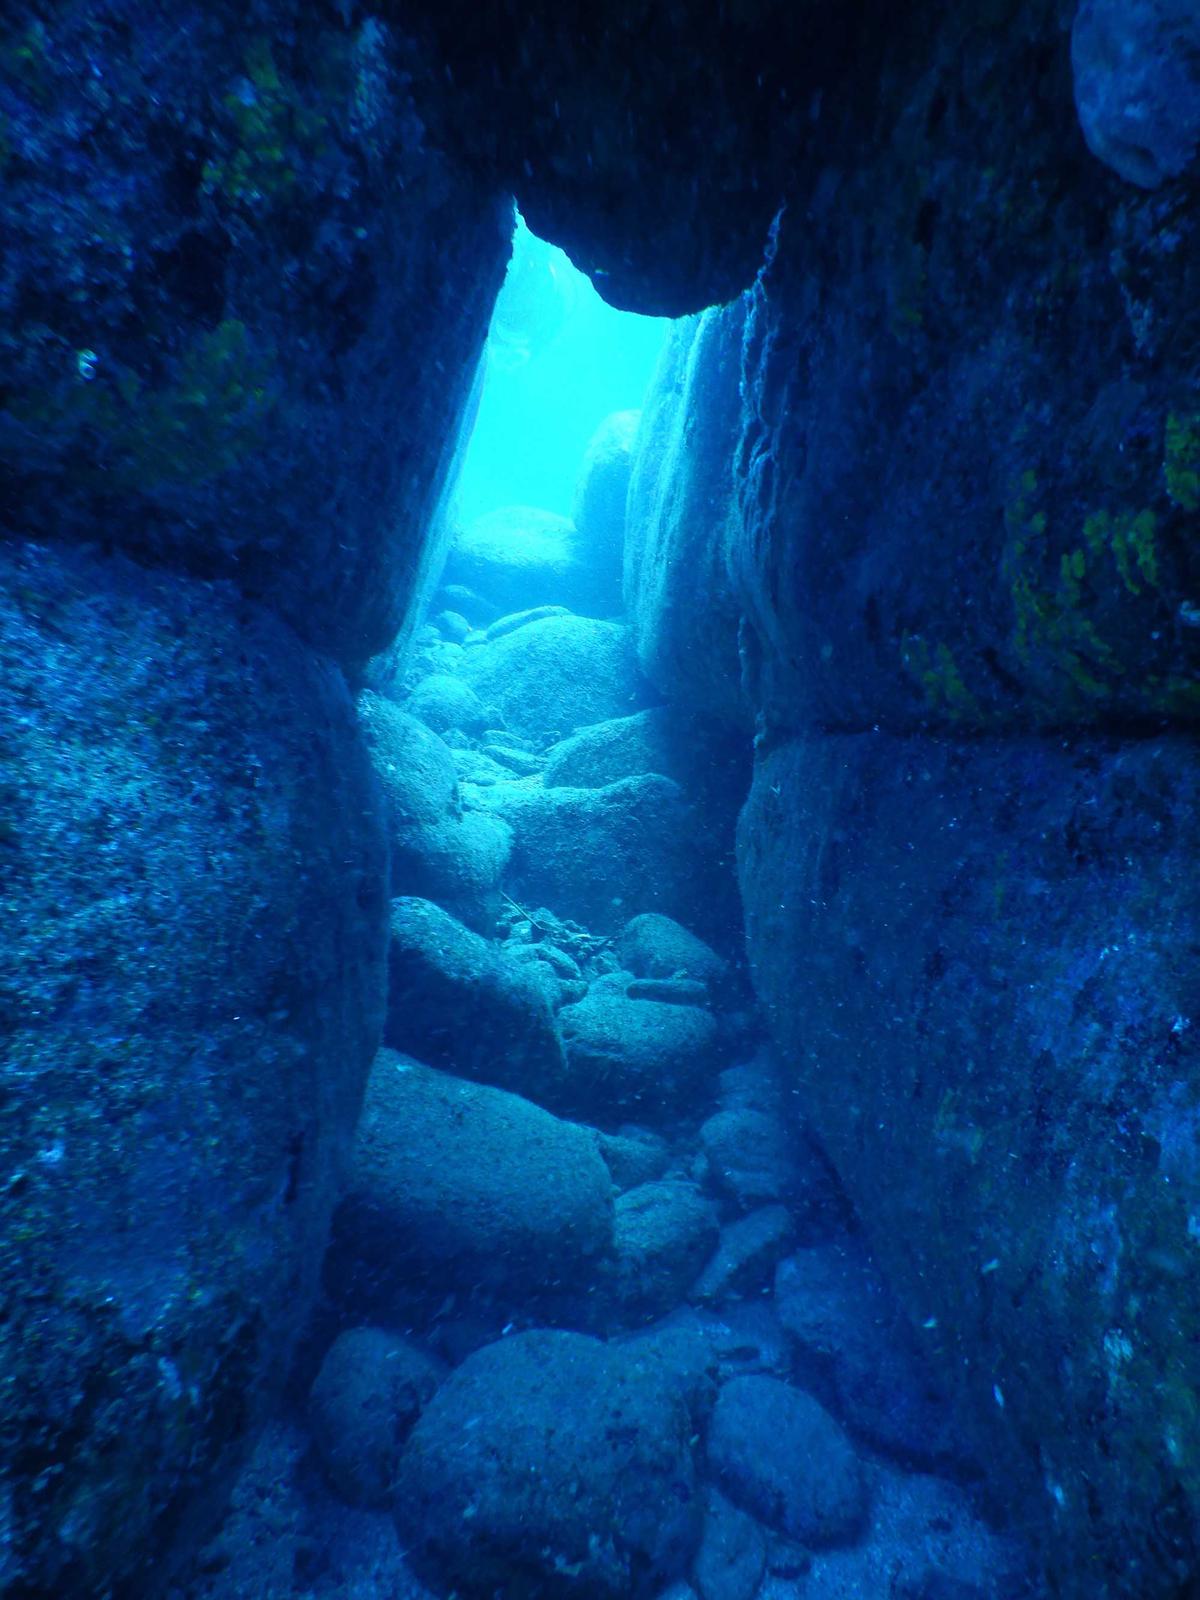 An underwater arch at the Yonaguni Monument. (<a href="https://commons.wikimedia.org/wiki/File:Yonaguni_Monument_Arch.jpg">Melkov</a>/Public Domain)